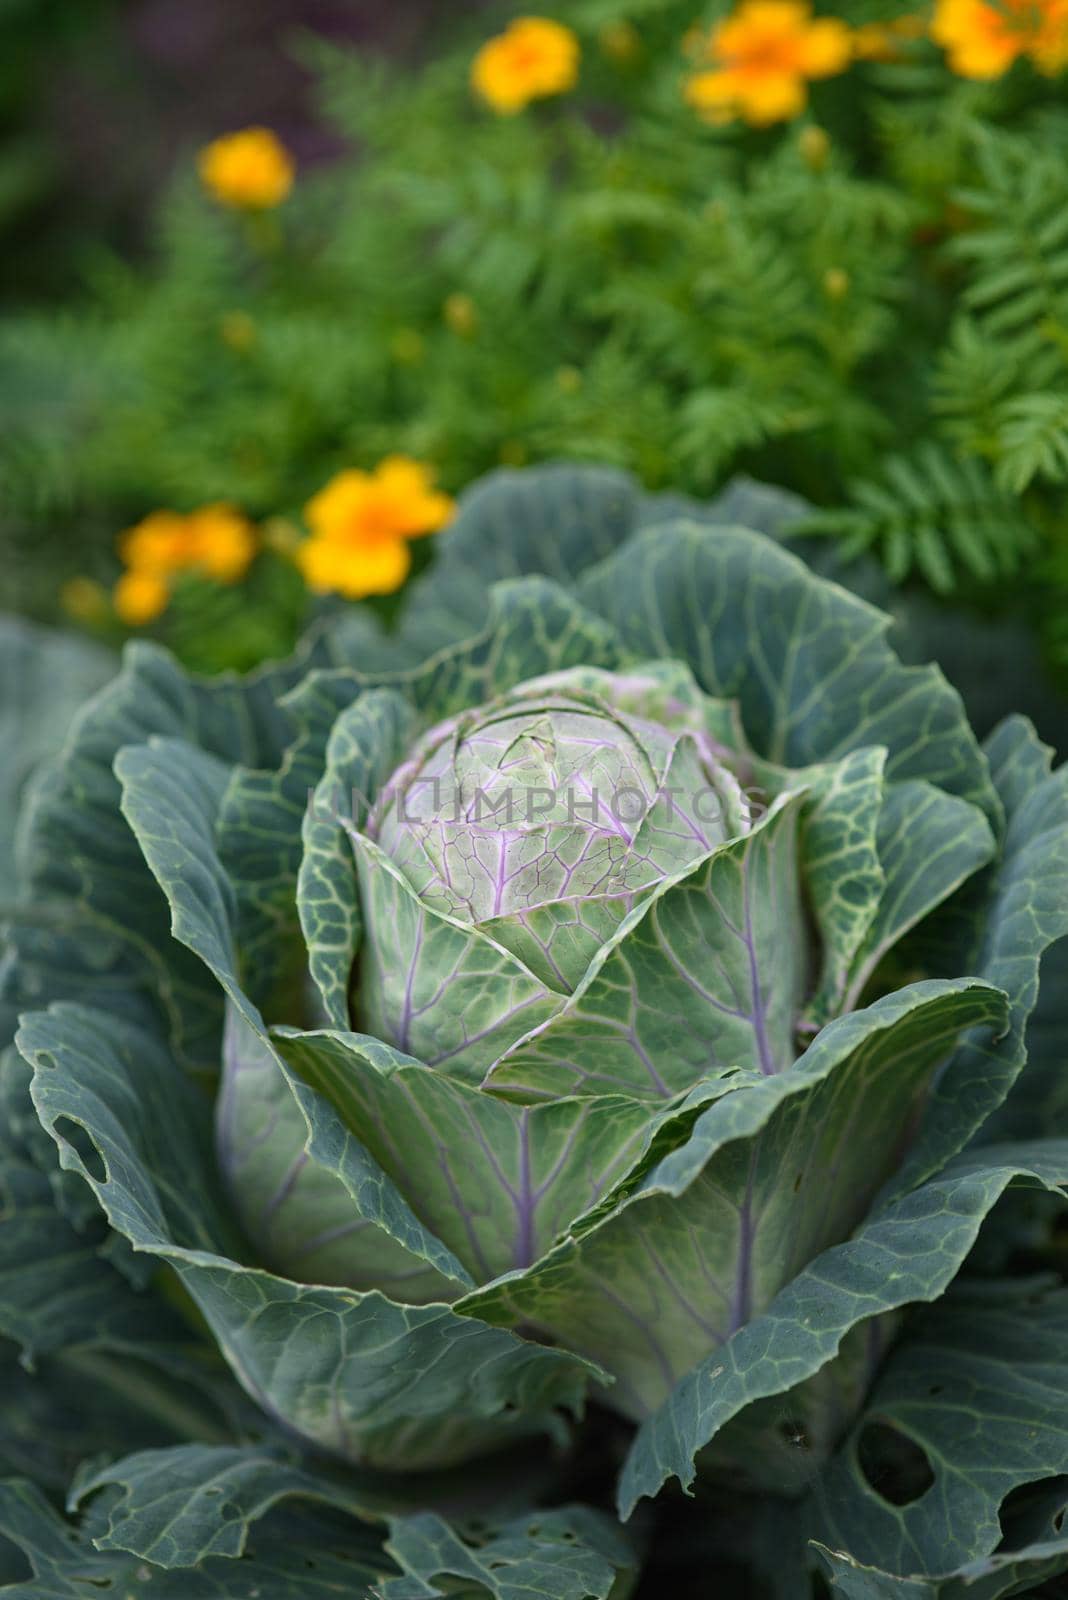 Agricultural industry. Cabbage head in the garden close-up.